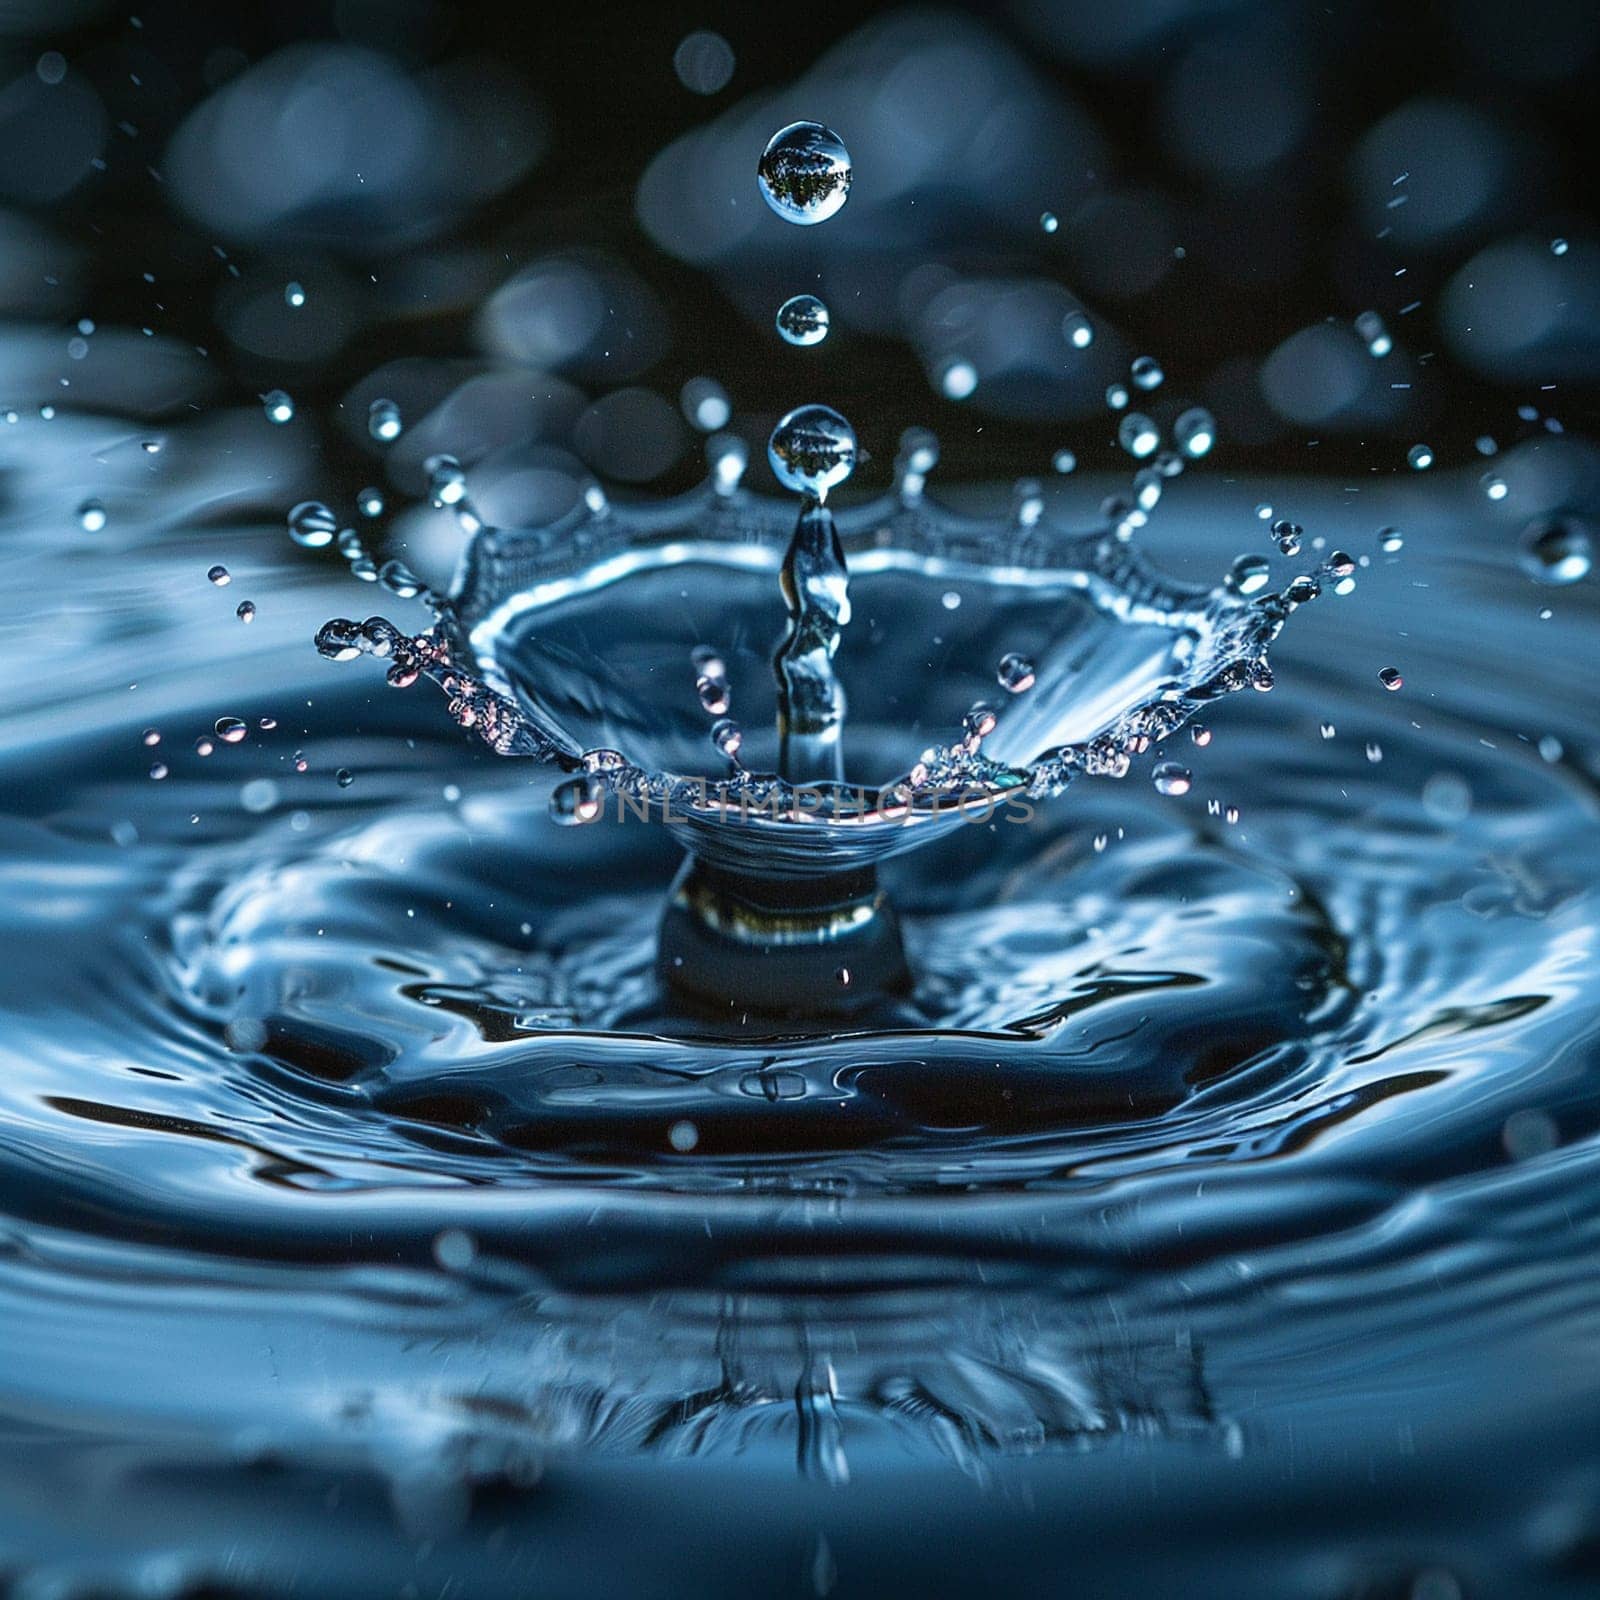 Close-up of droplet splashing into still body of water for World Water Day.